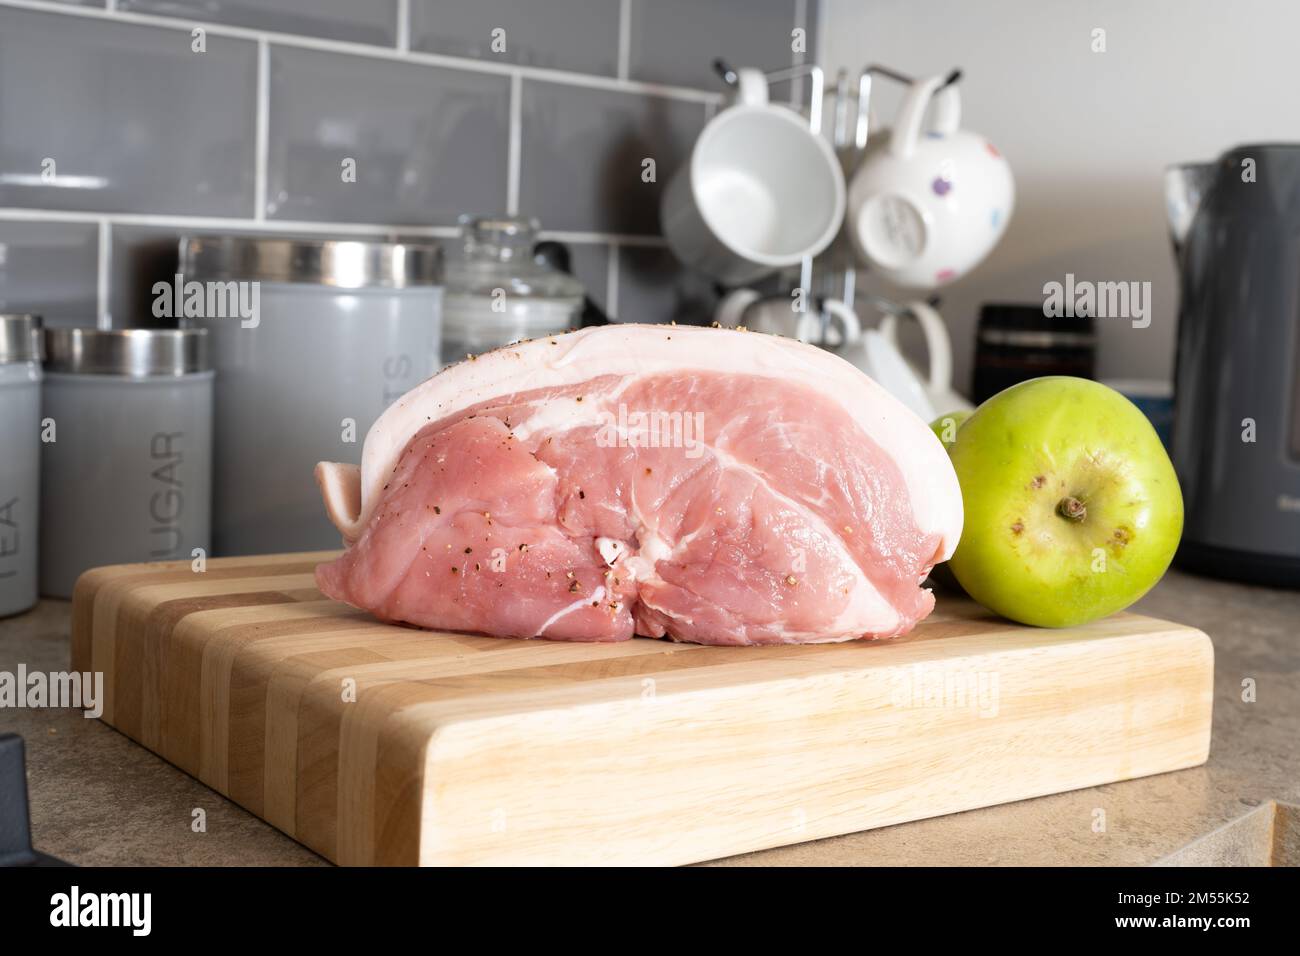 raw uncooked  Pork leg joint with cooking apple on a wooden chopping board Stock Photo